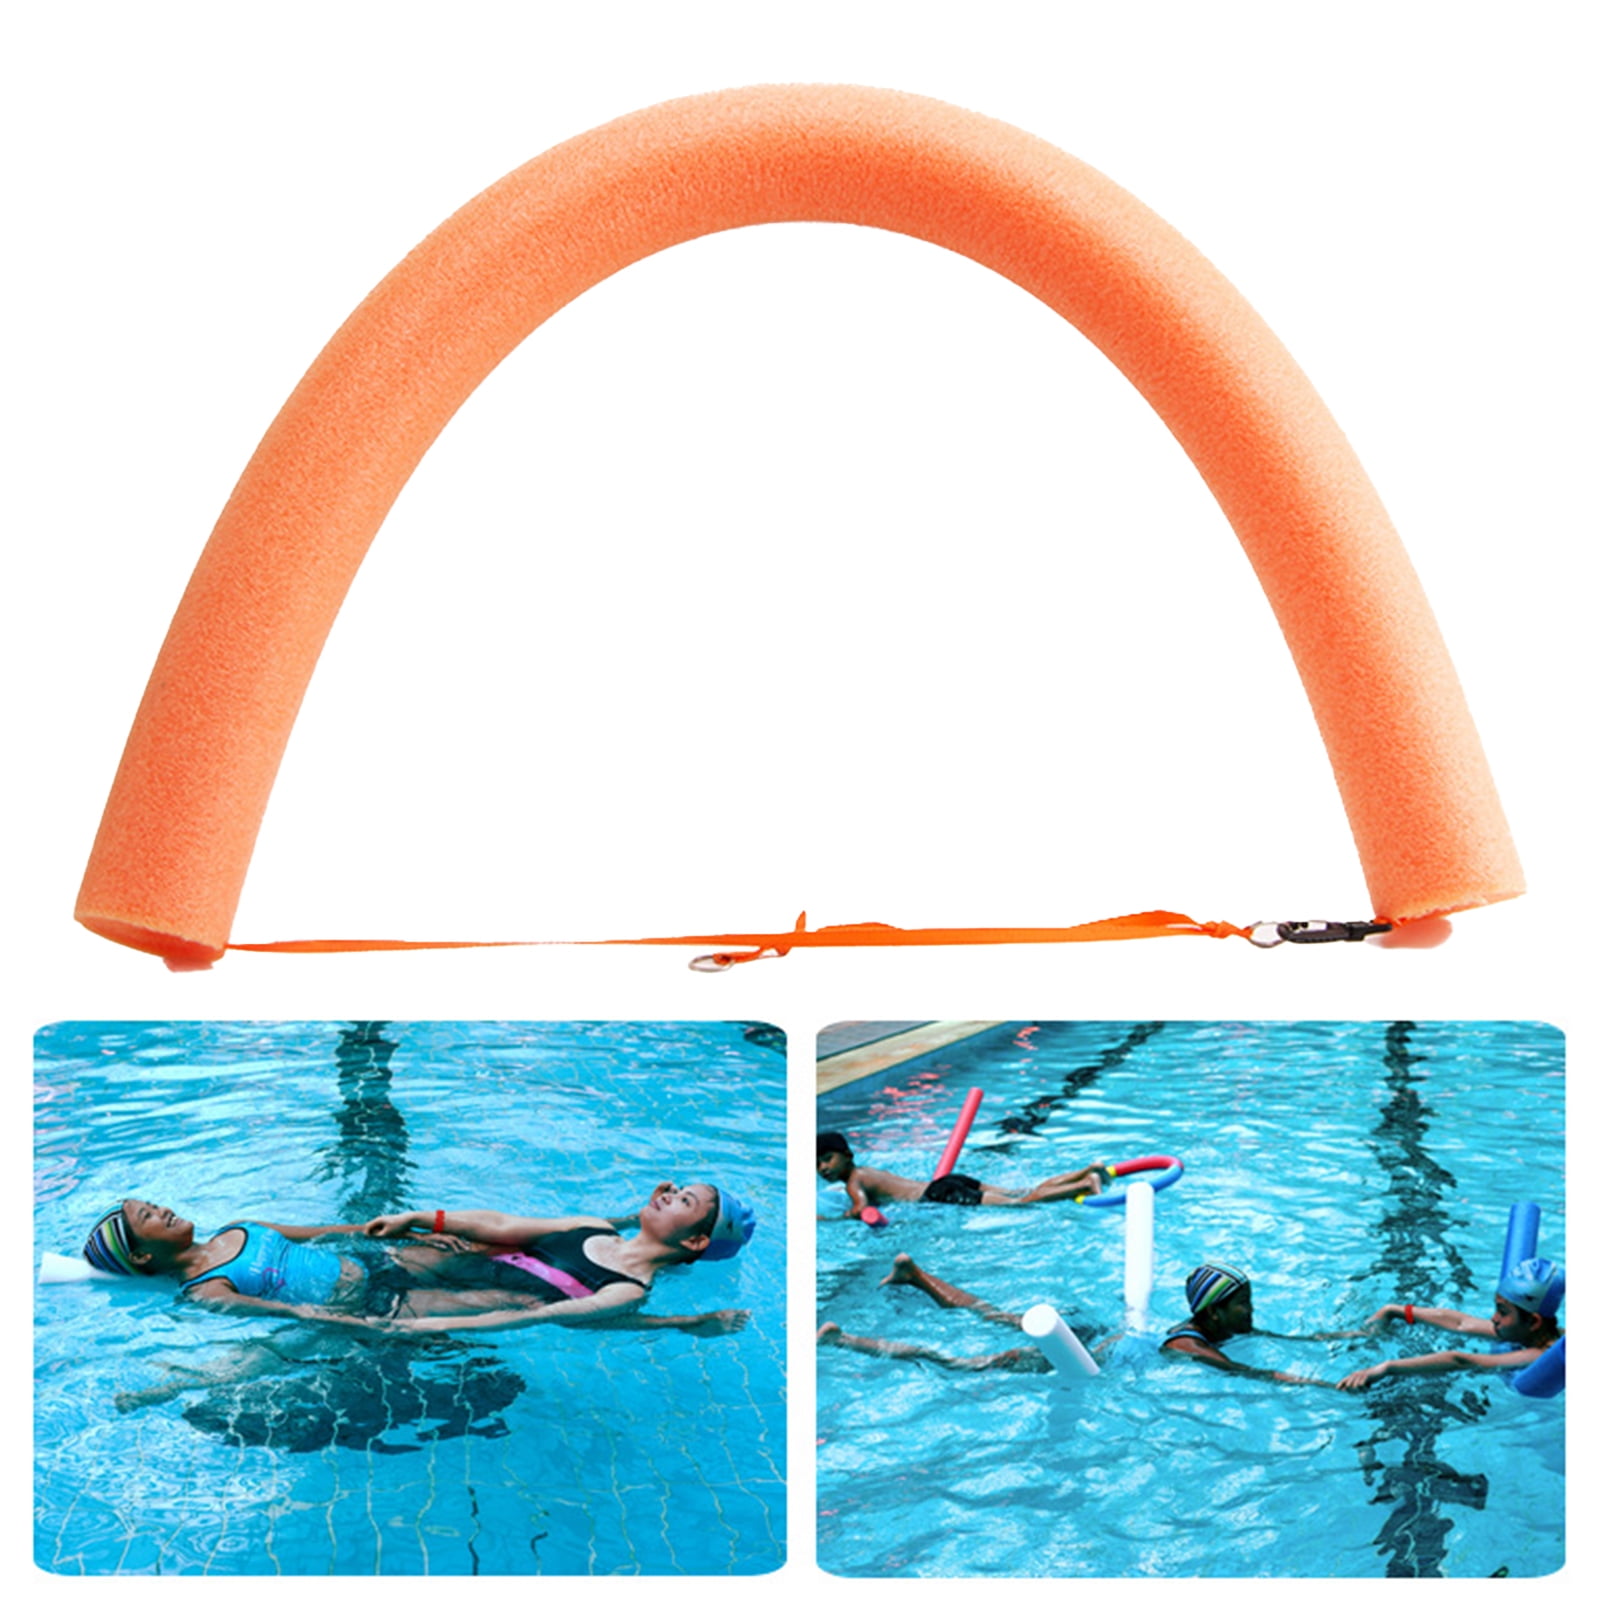 E-TING Swim Ring Summer Fun Swimming Pool Float Raft Lilo Lifebuoy for Girl Dolls Pool Party and Kids Bath Toys Inflatable Drink Holders 